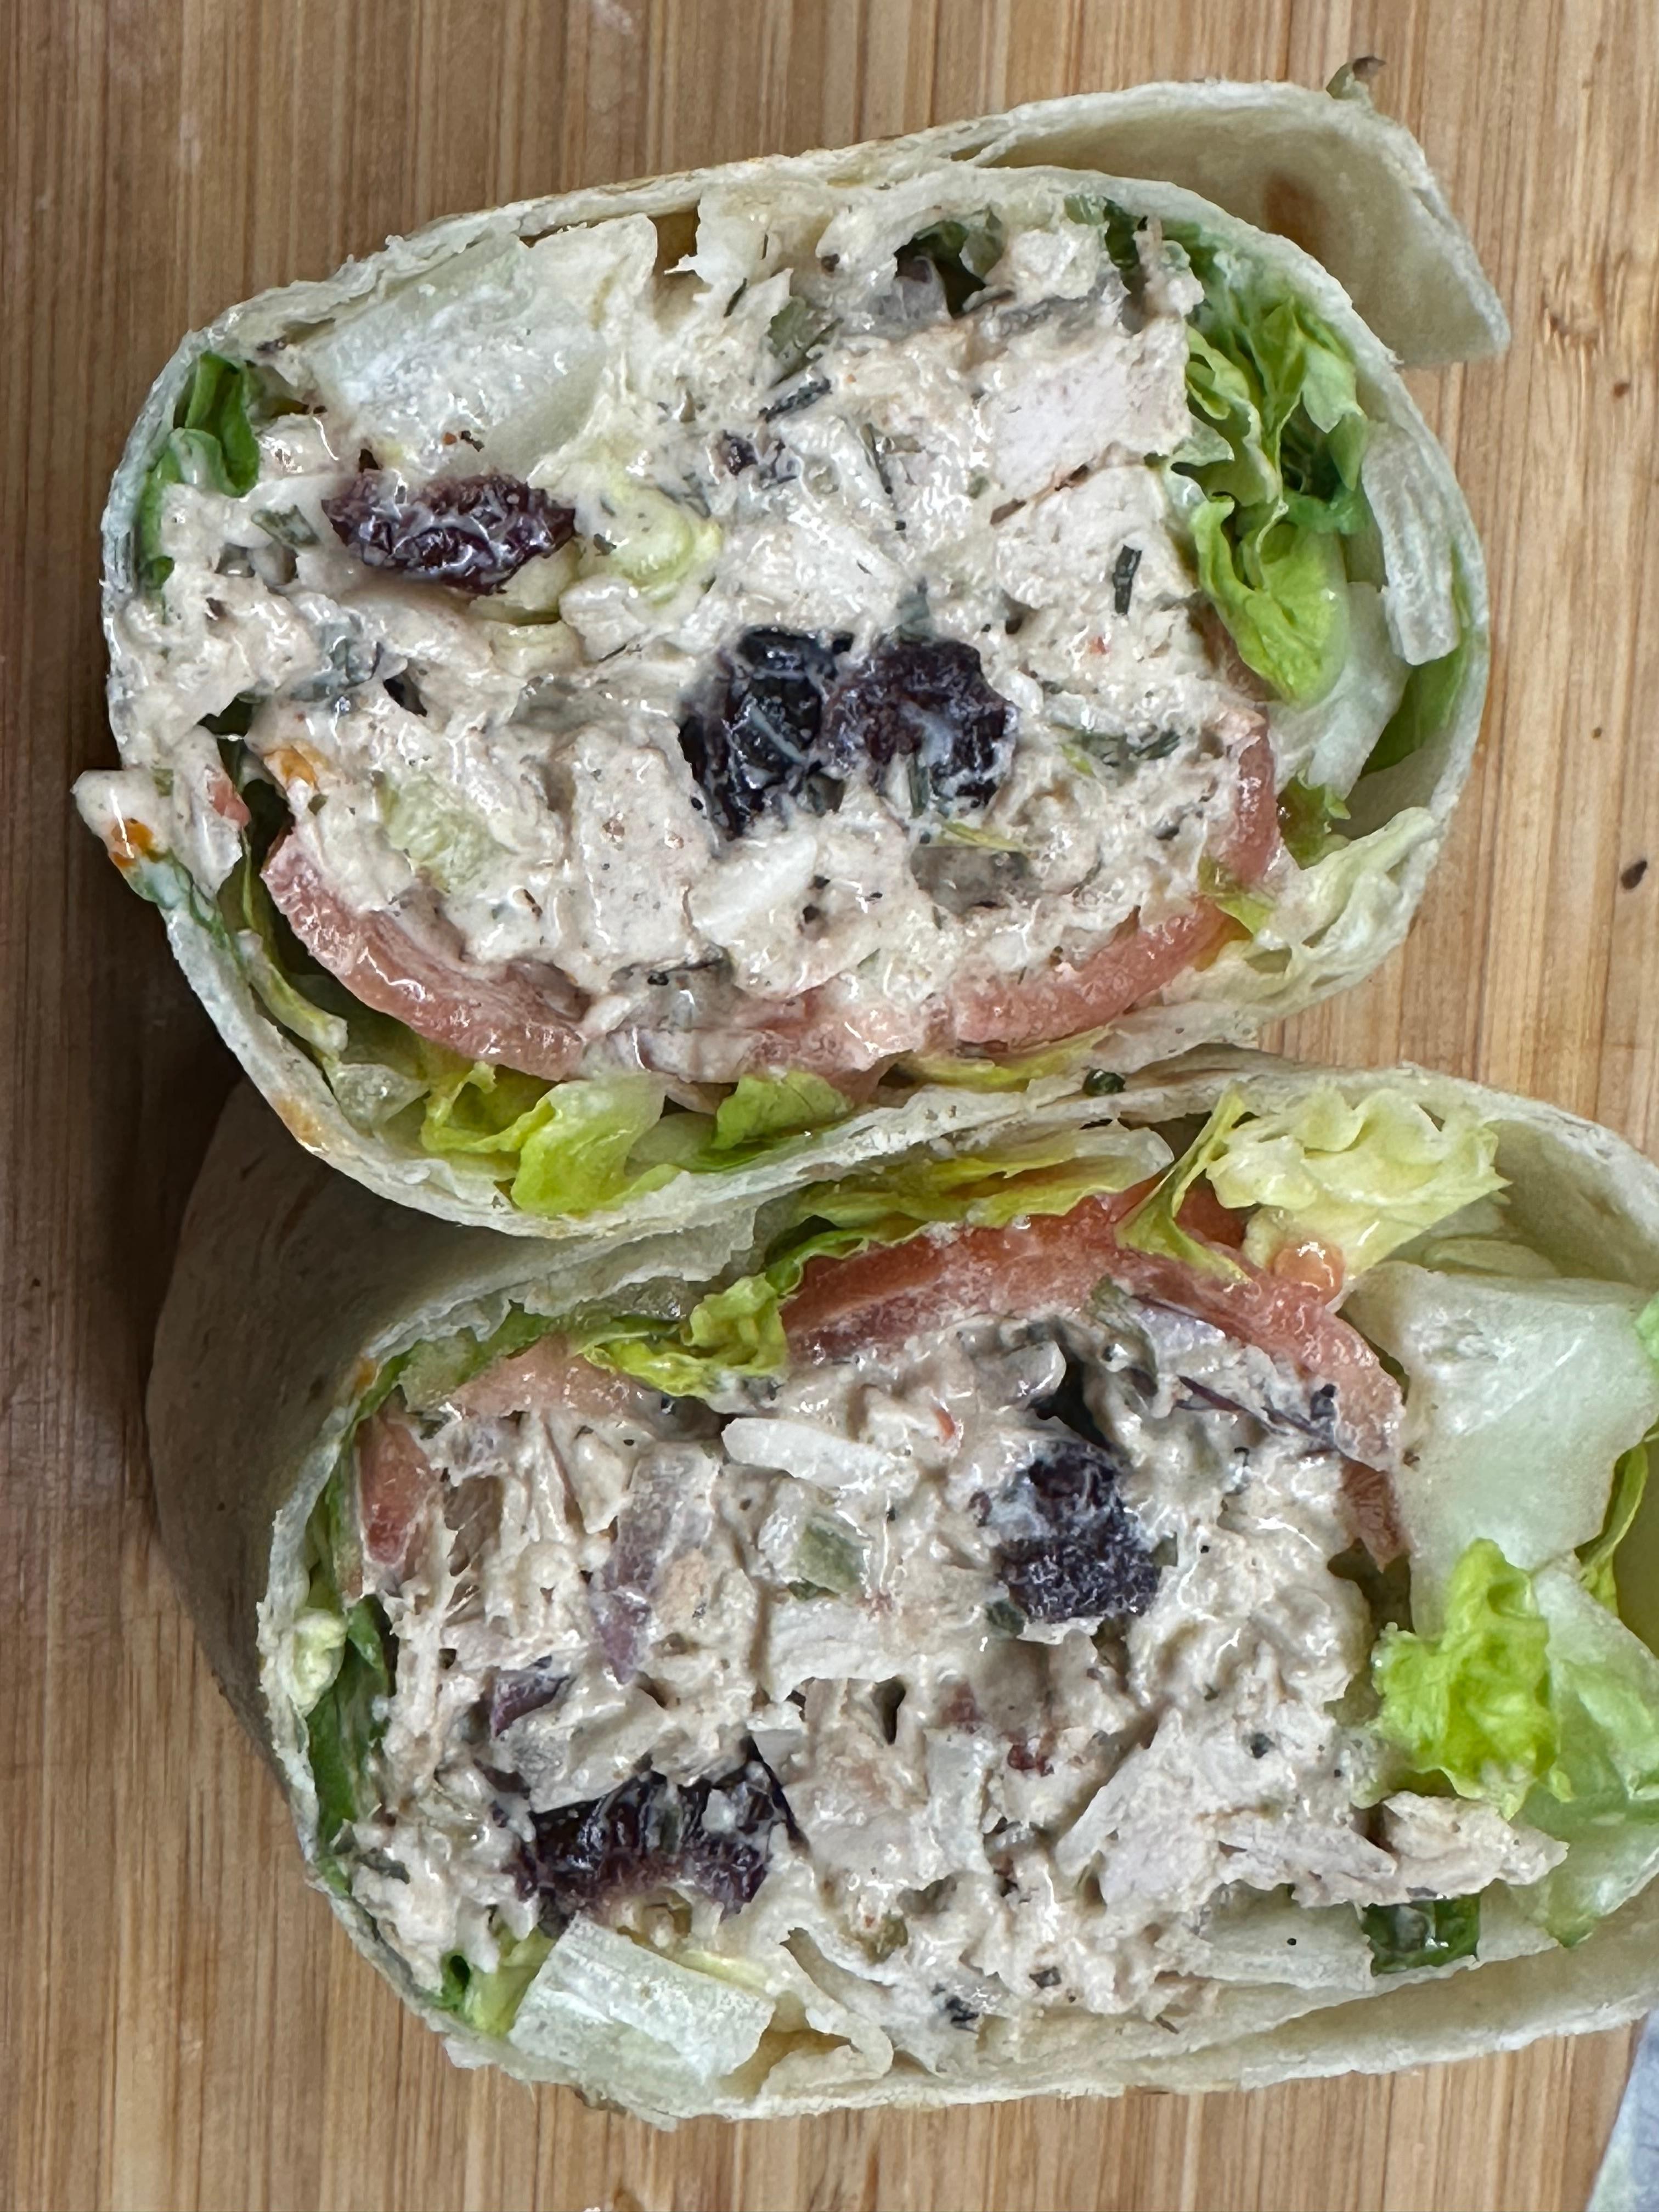 CHICKEN SALAD WRAP (chicken salad made with cranberries, almonds, mayo and onions with lettuce and tomato)